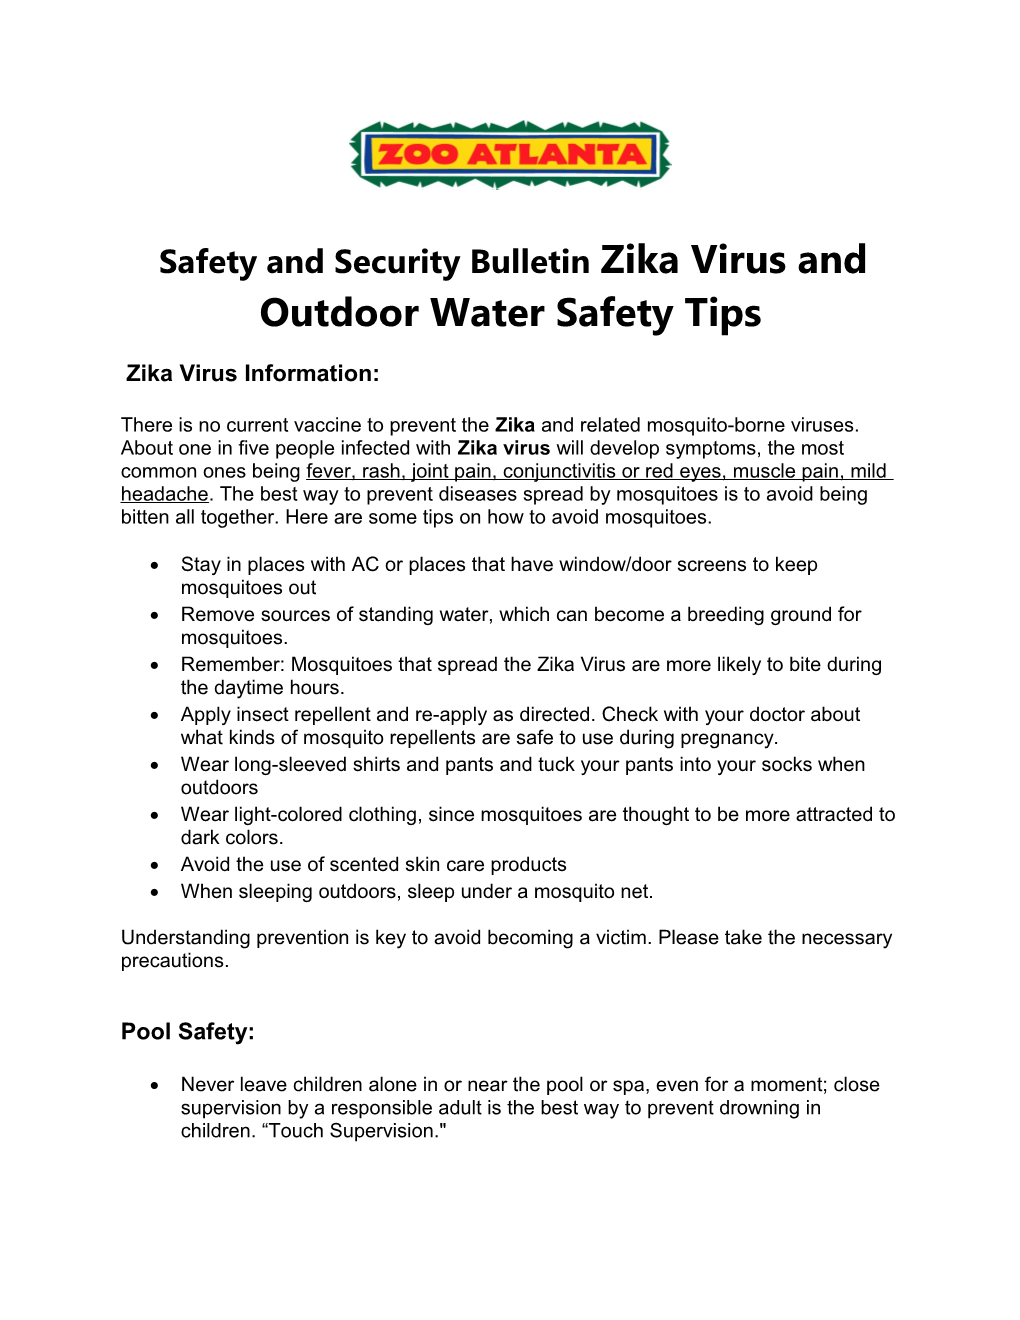 Safety and Security Bulletin Zika Virus and Outdoor Water Safety Tips